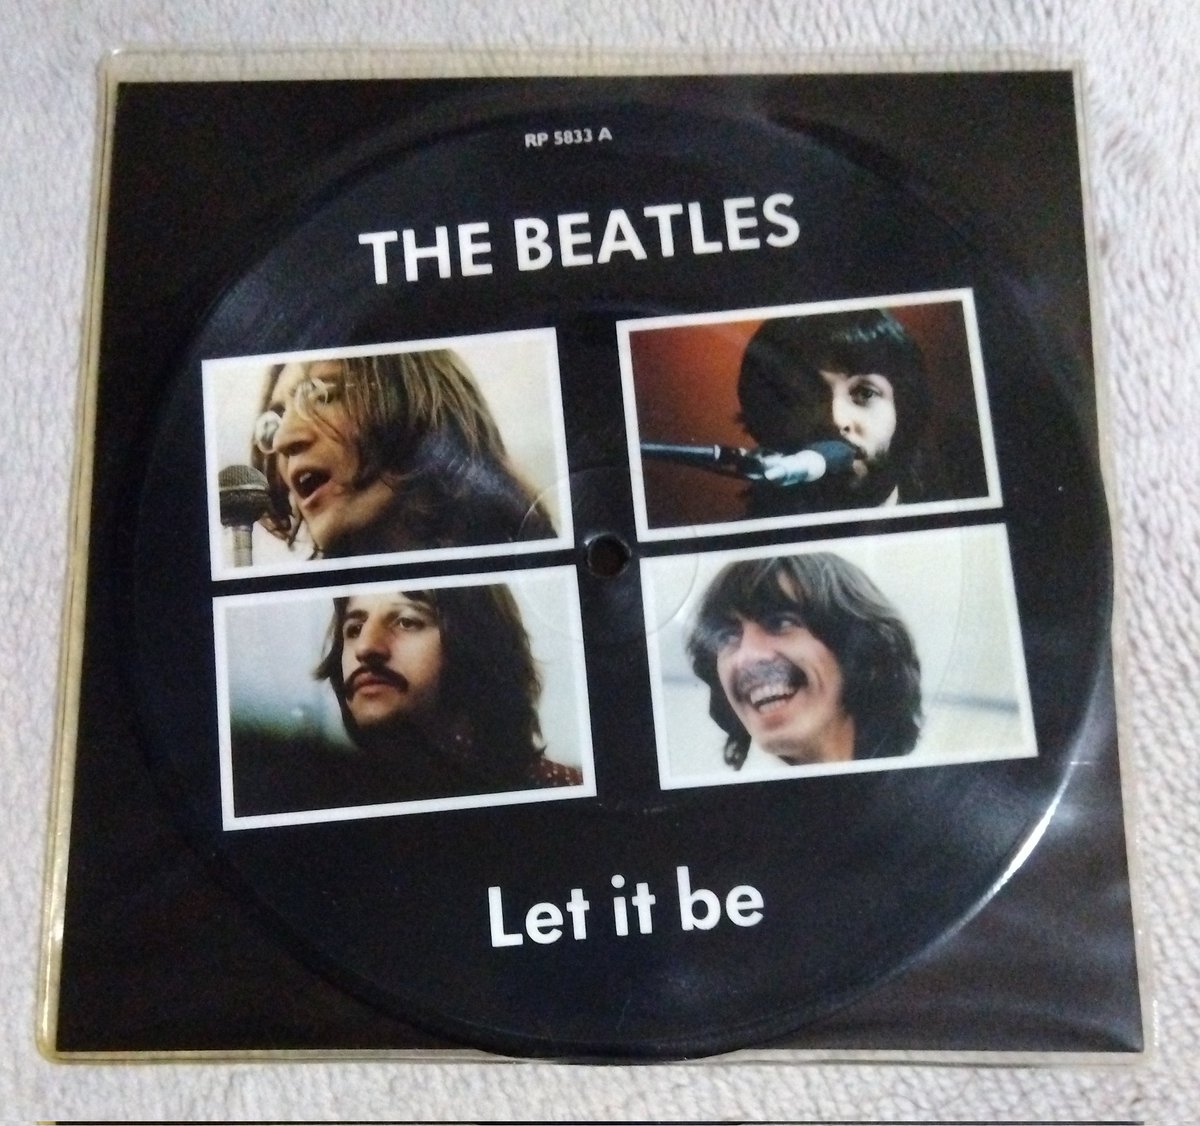 #NowPlaying
LET IT BE
#TheBeatles